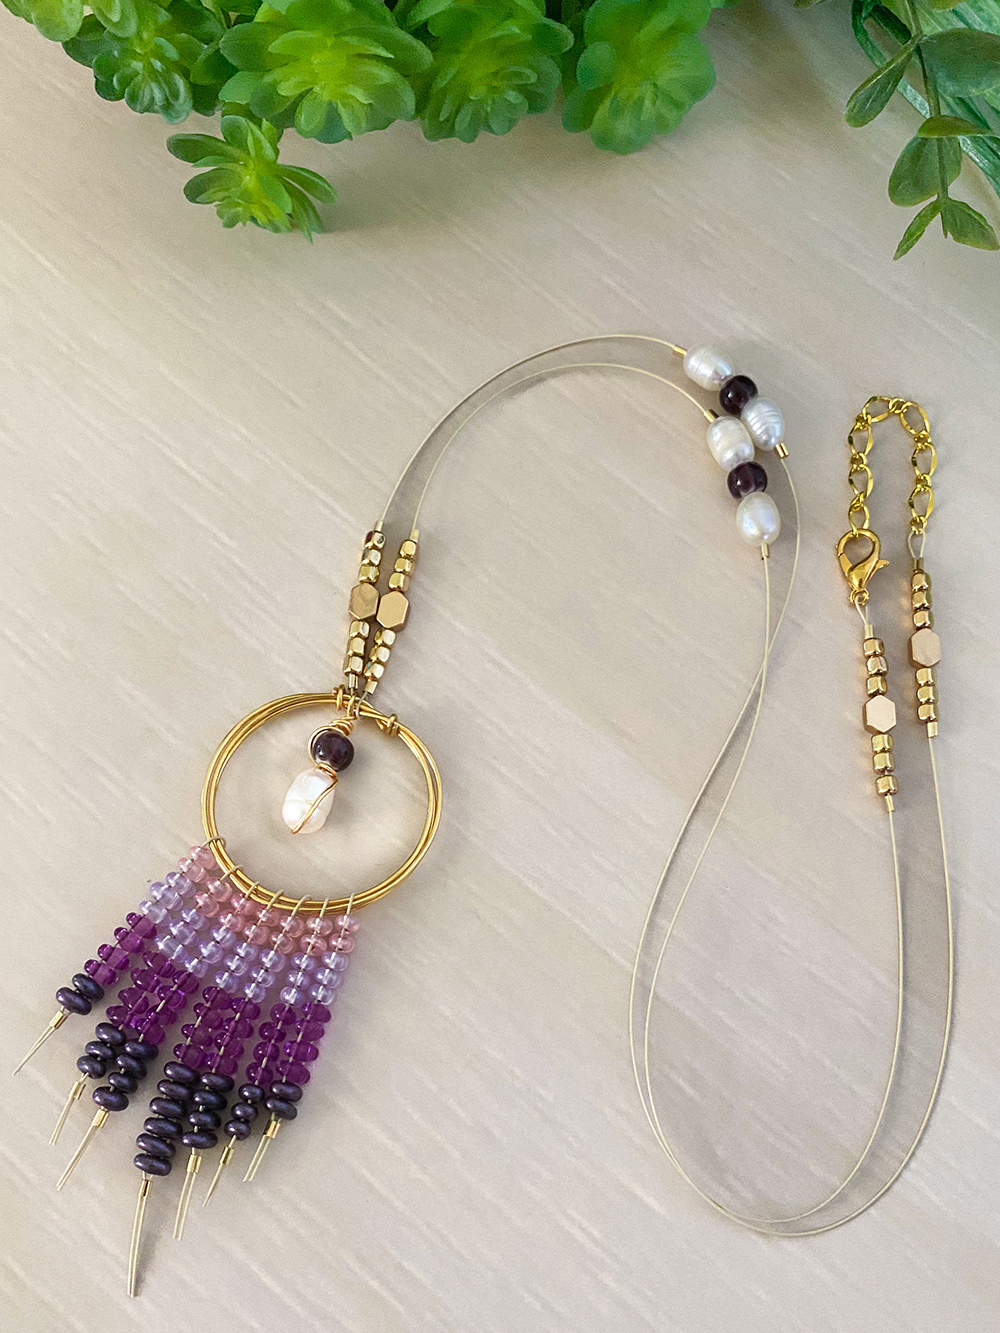 Seed Bead Necklace by Danielle Wickes